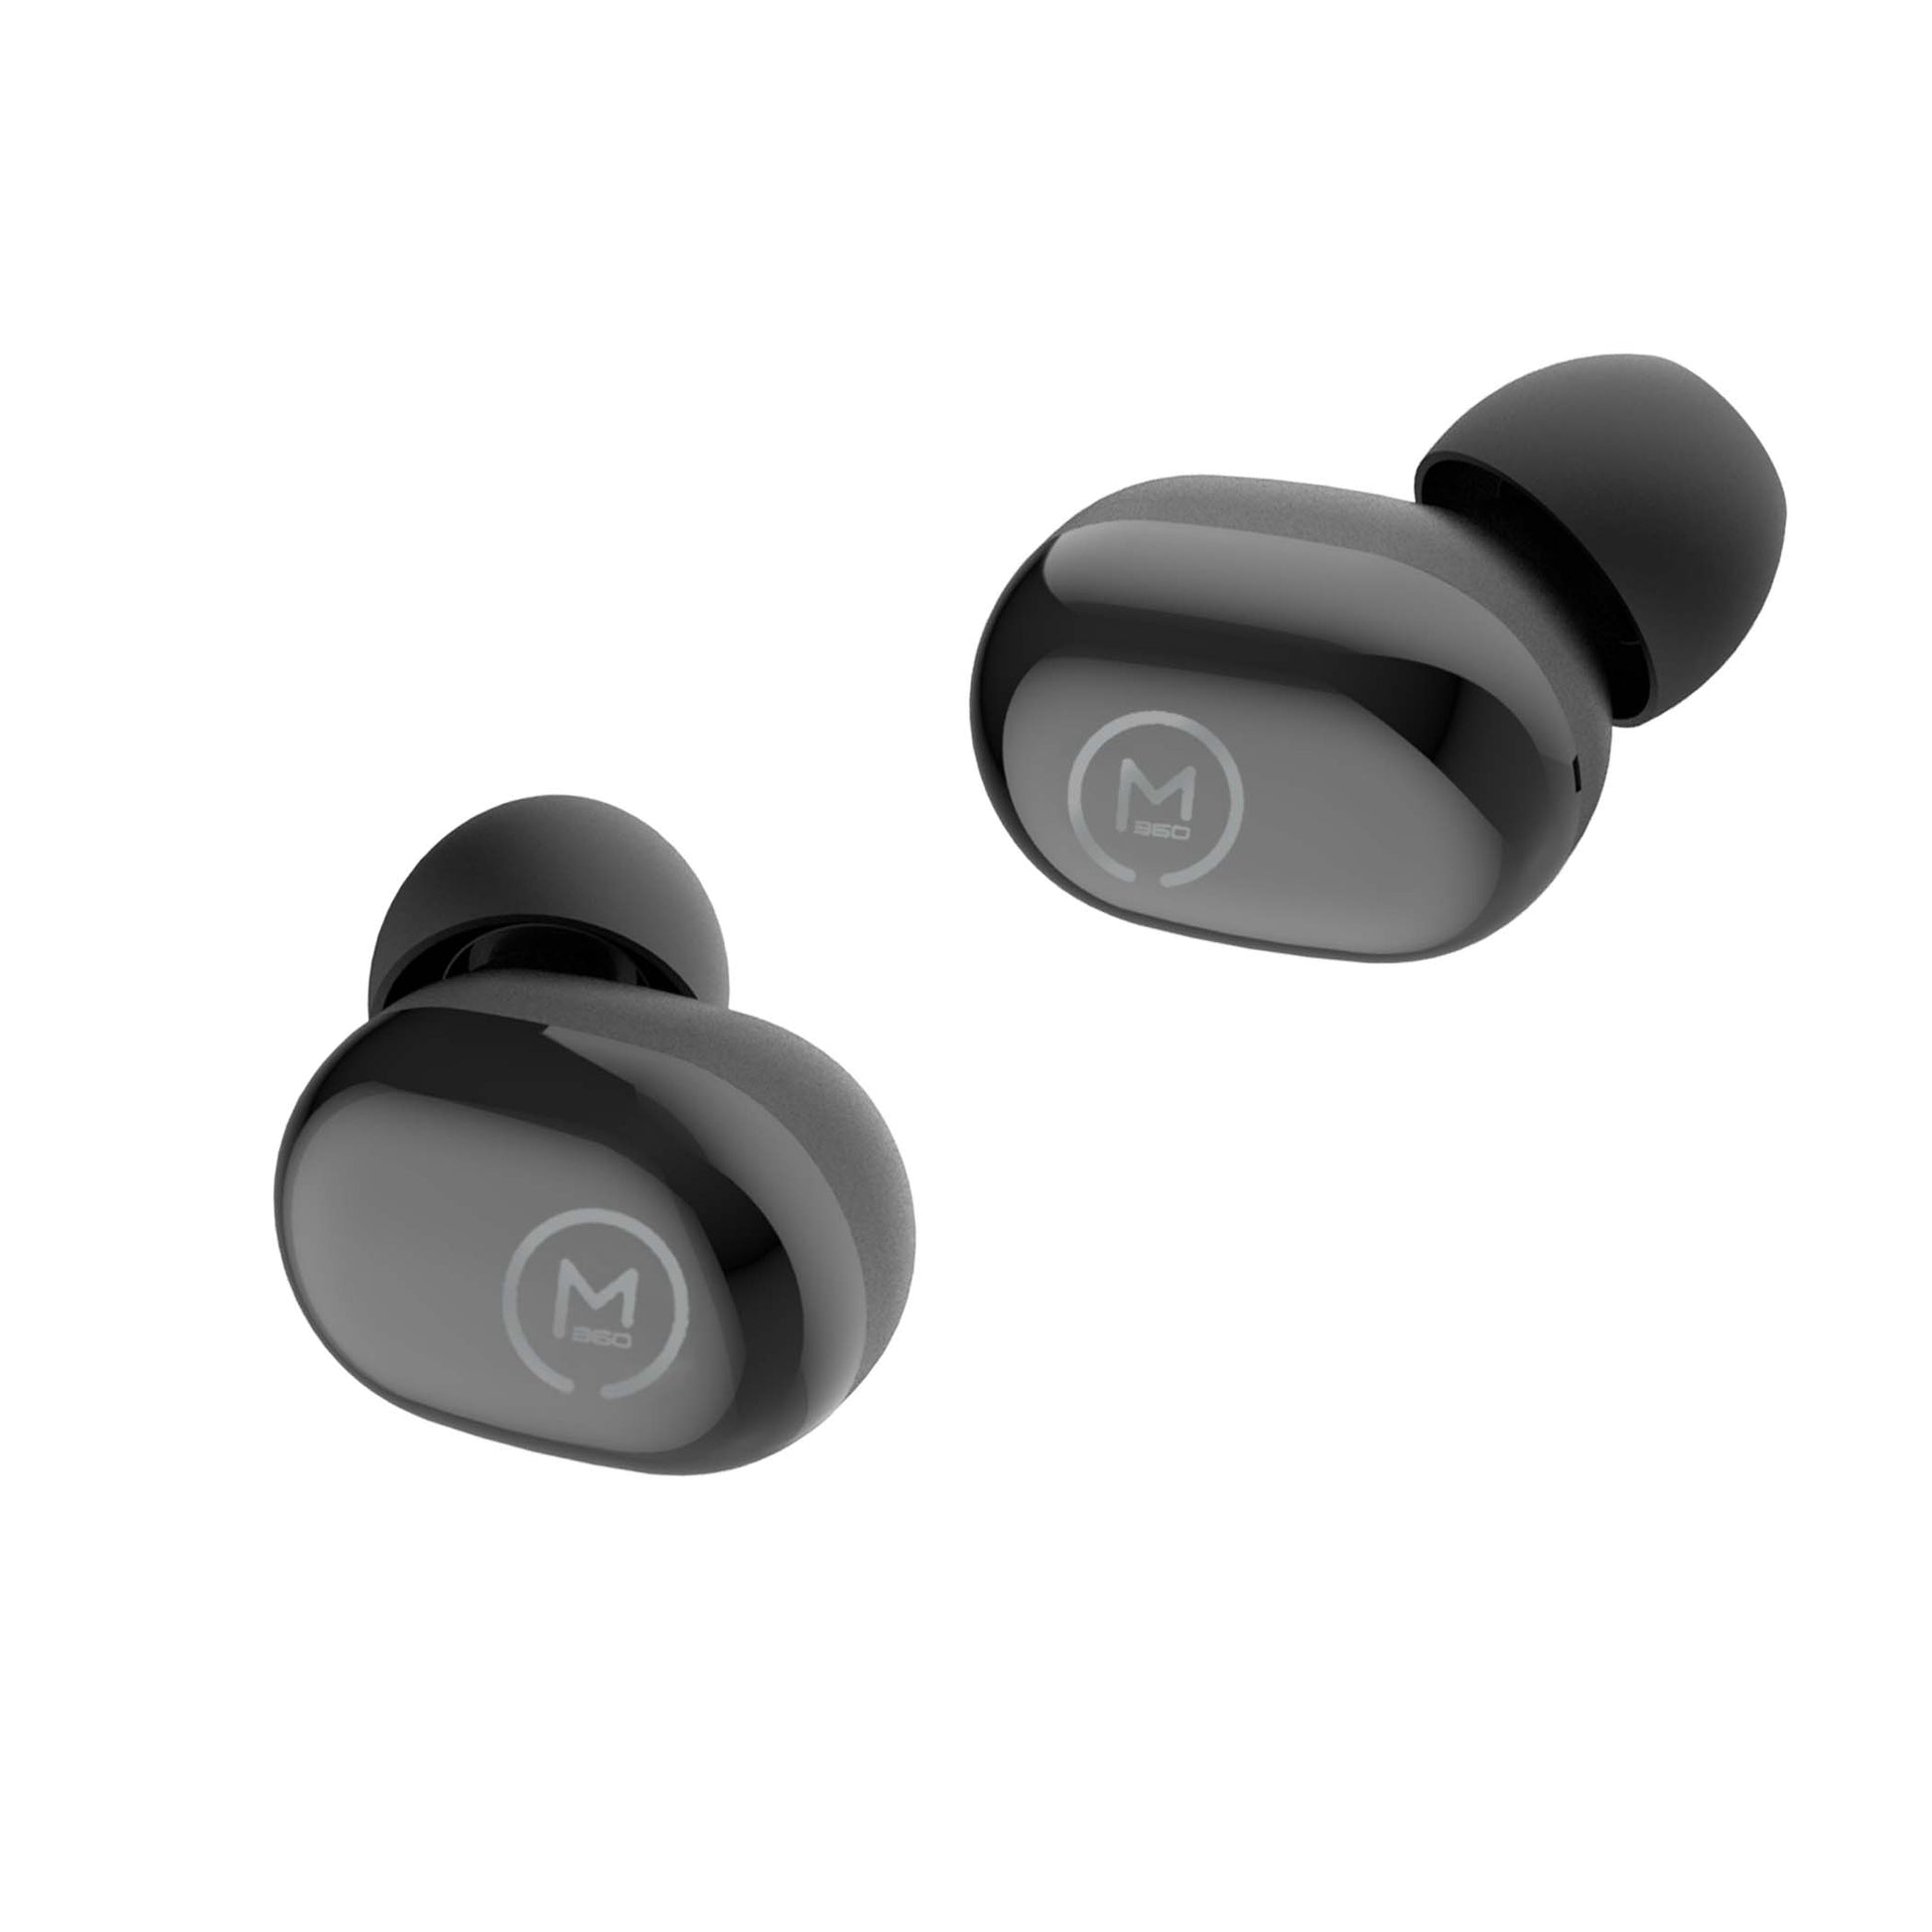 Photo of Morpheus 360 Spire True Wireless Earbuds black left and right button earbuds.